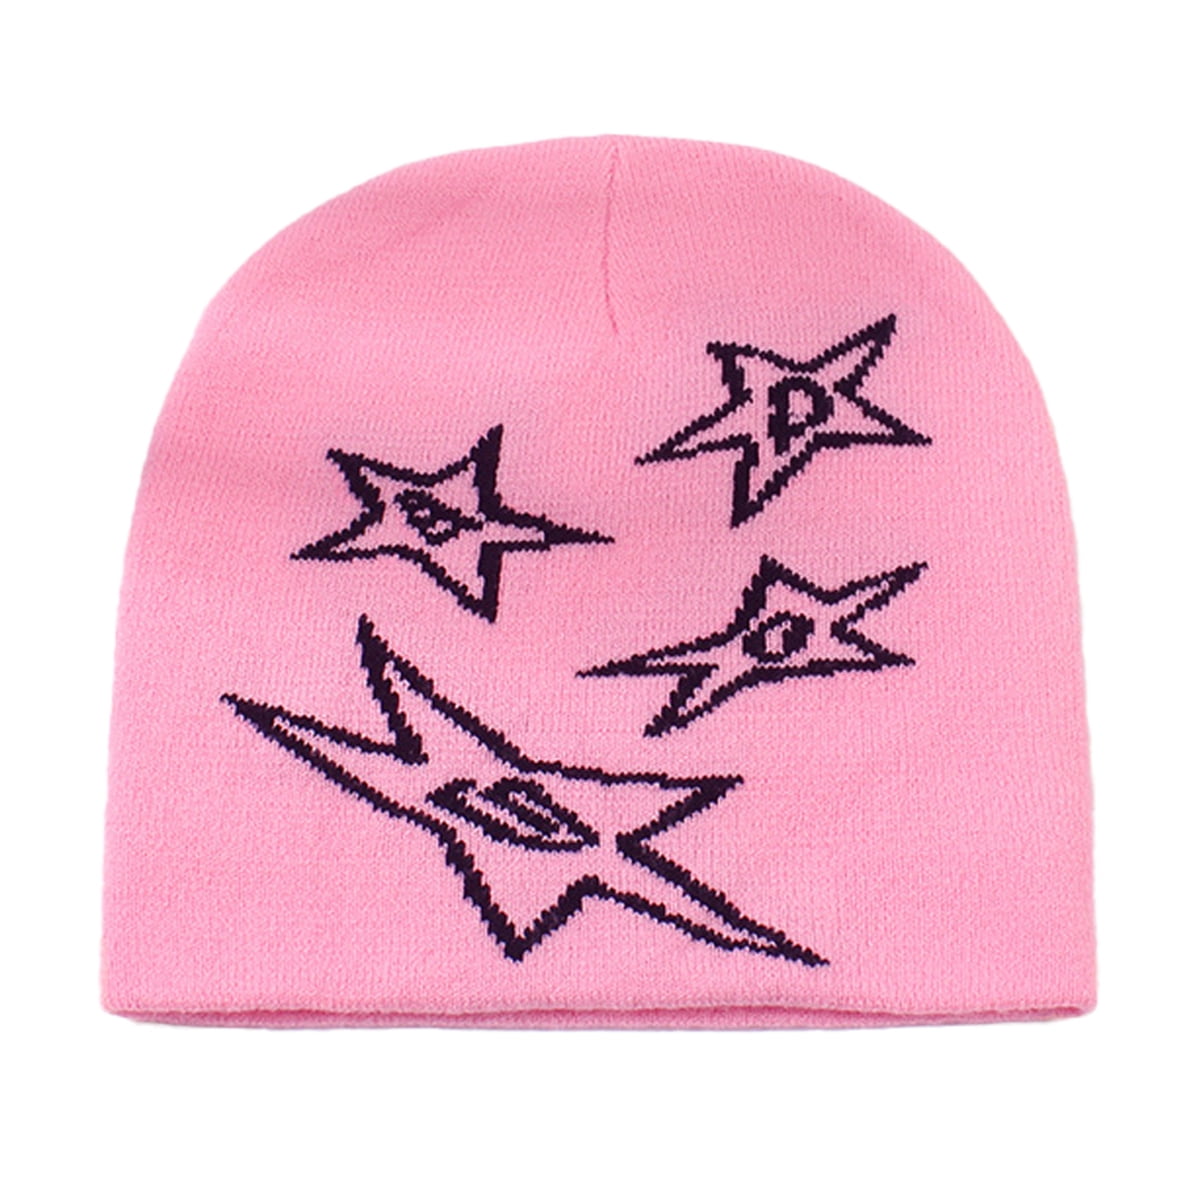 Hat Letter Ski Cap Unisex Jacquard Hat style - Wool 2; Women Hats Knitted Star Cycling Cute 2000s Skull Beanie Outdoor Men